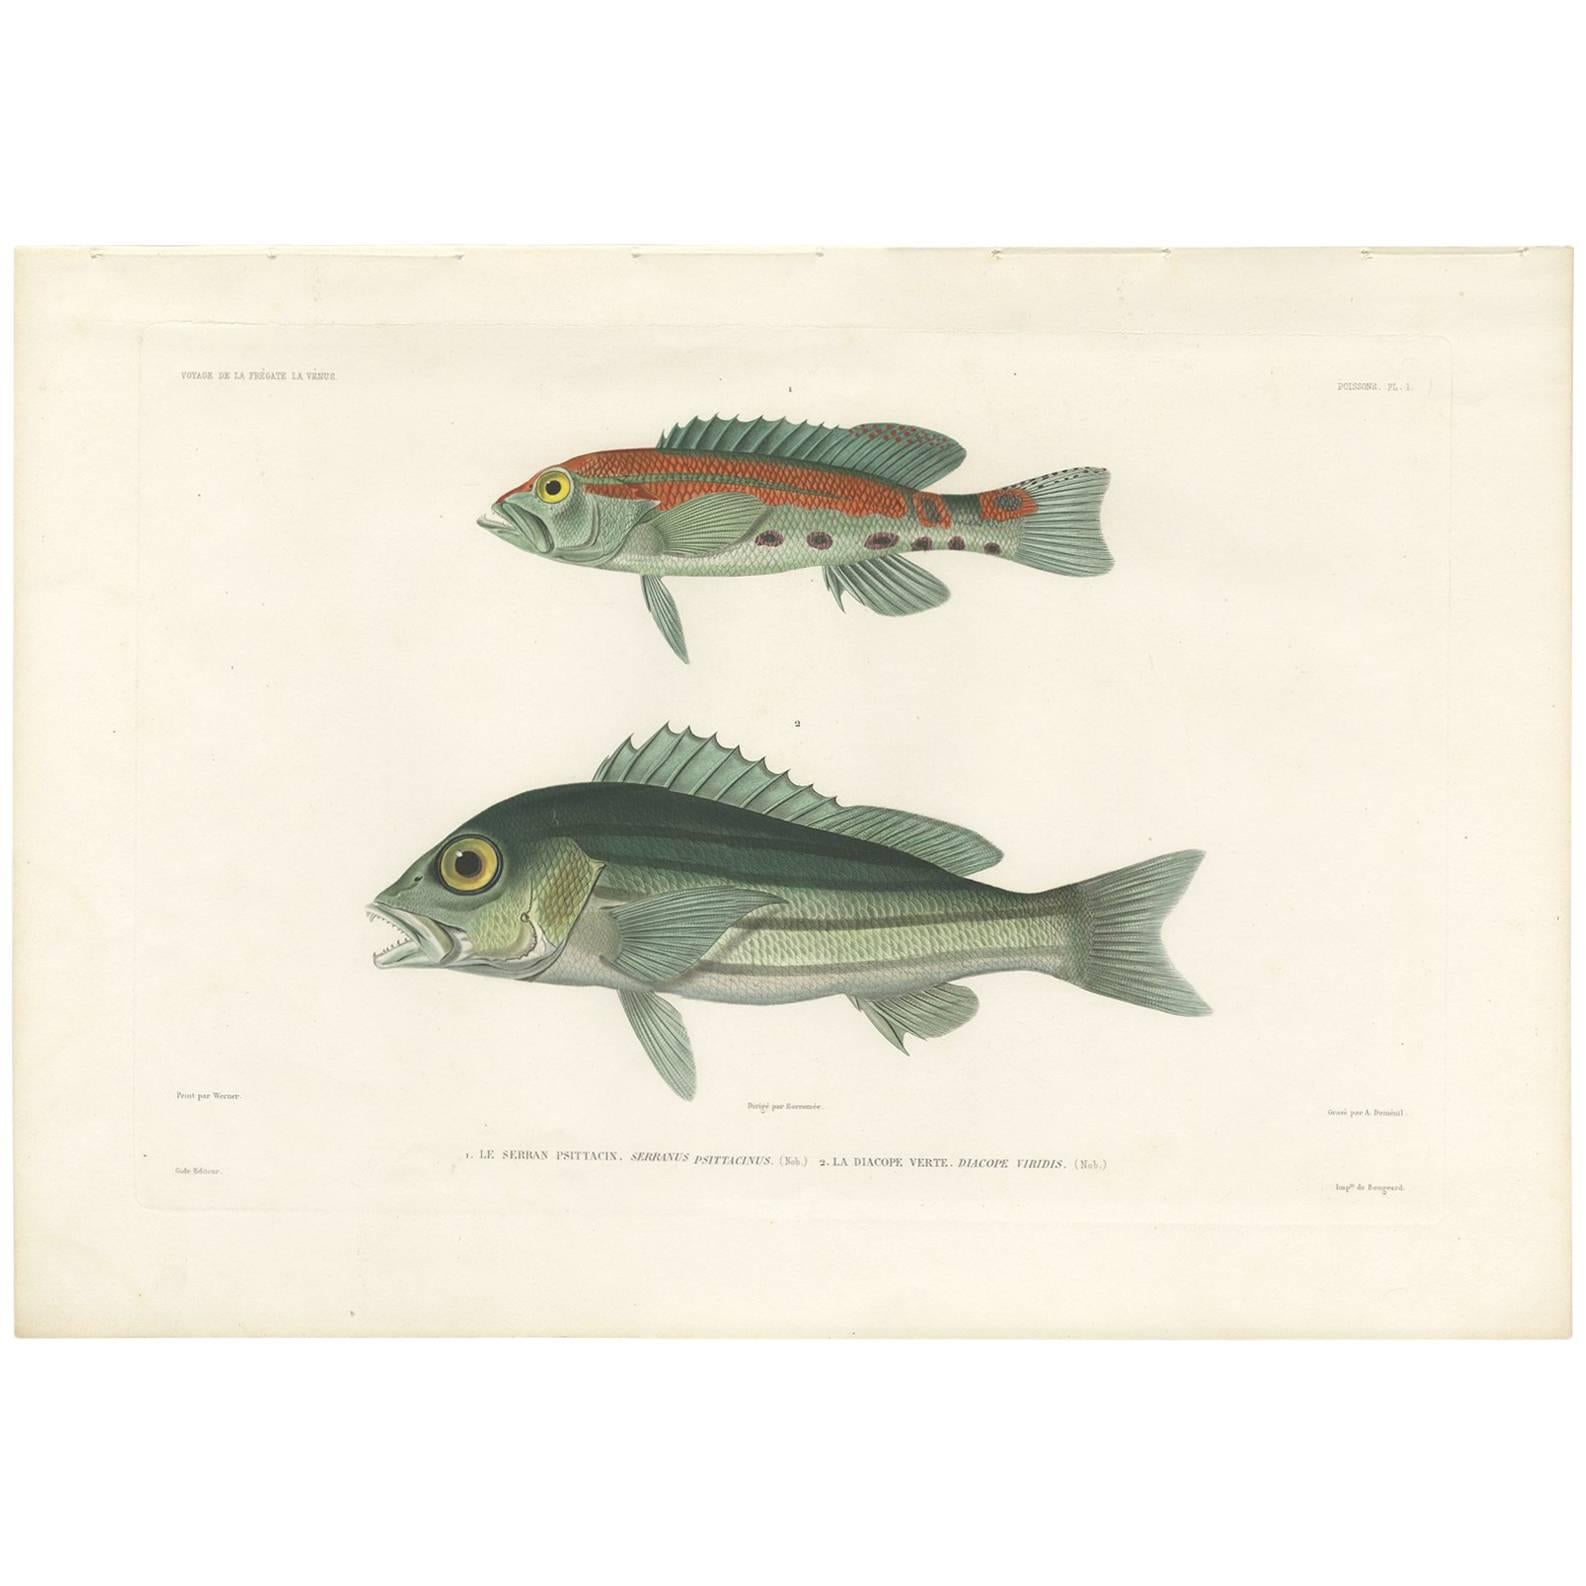 Antique Fish Print of the Serranus and Blue and Gold Snapper by Gide, 1846